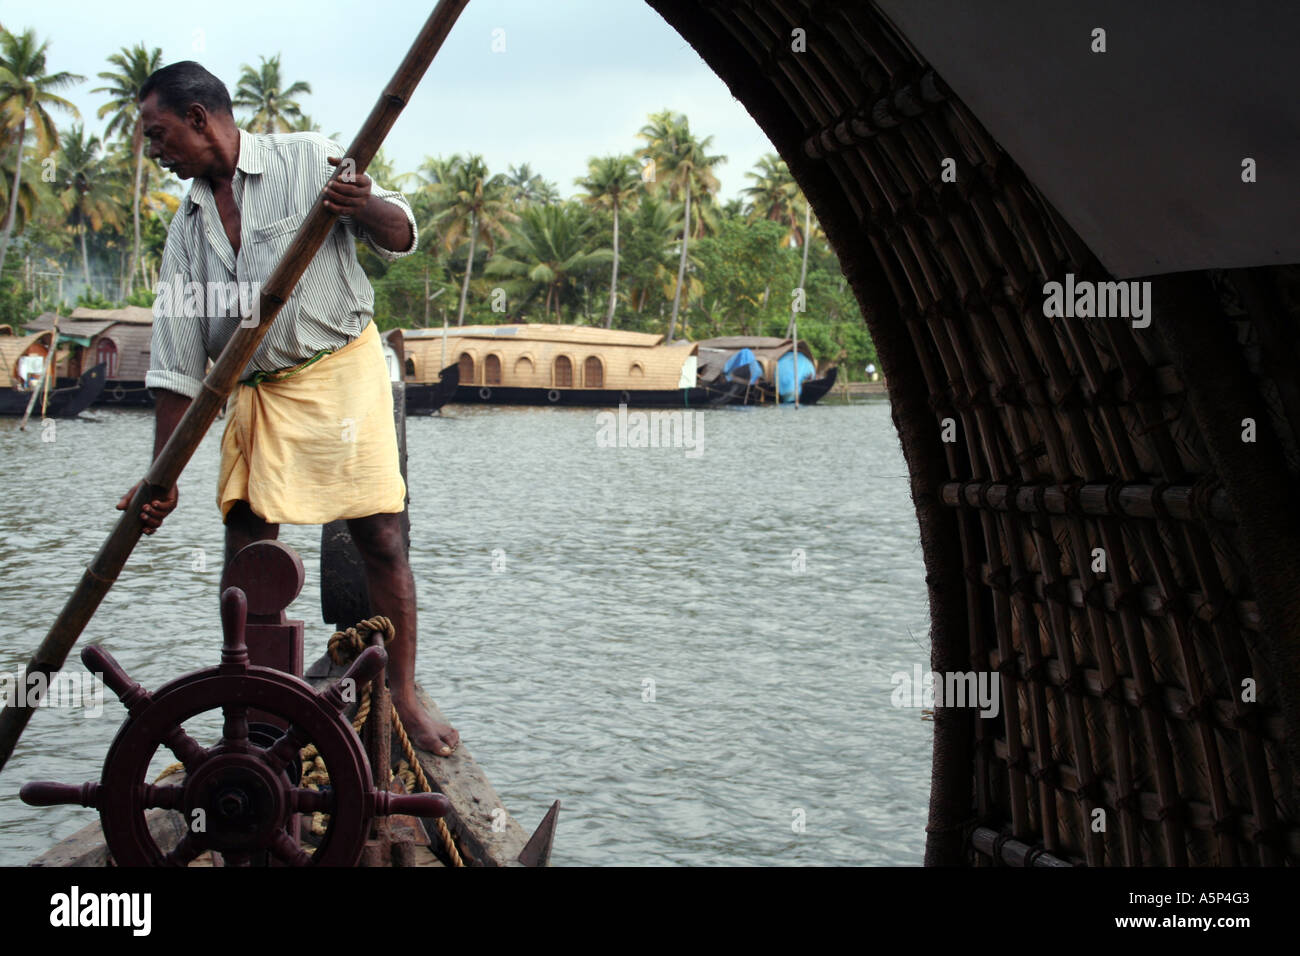 Man steering a houseboat on the backwaters of Kerala Stock Photo